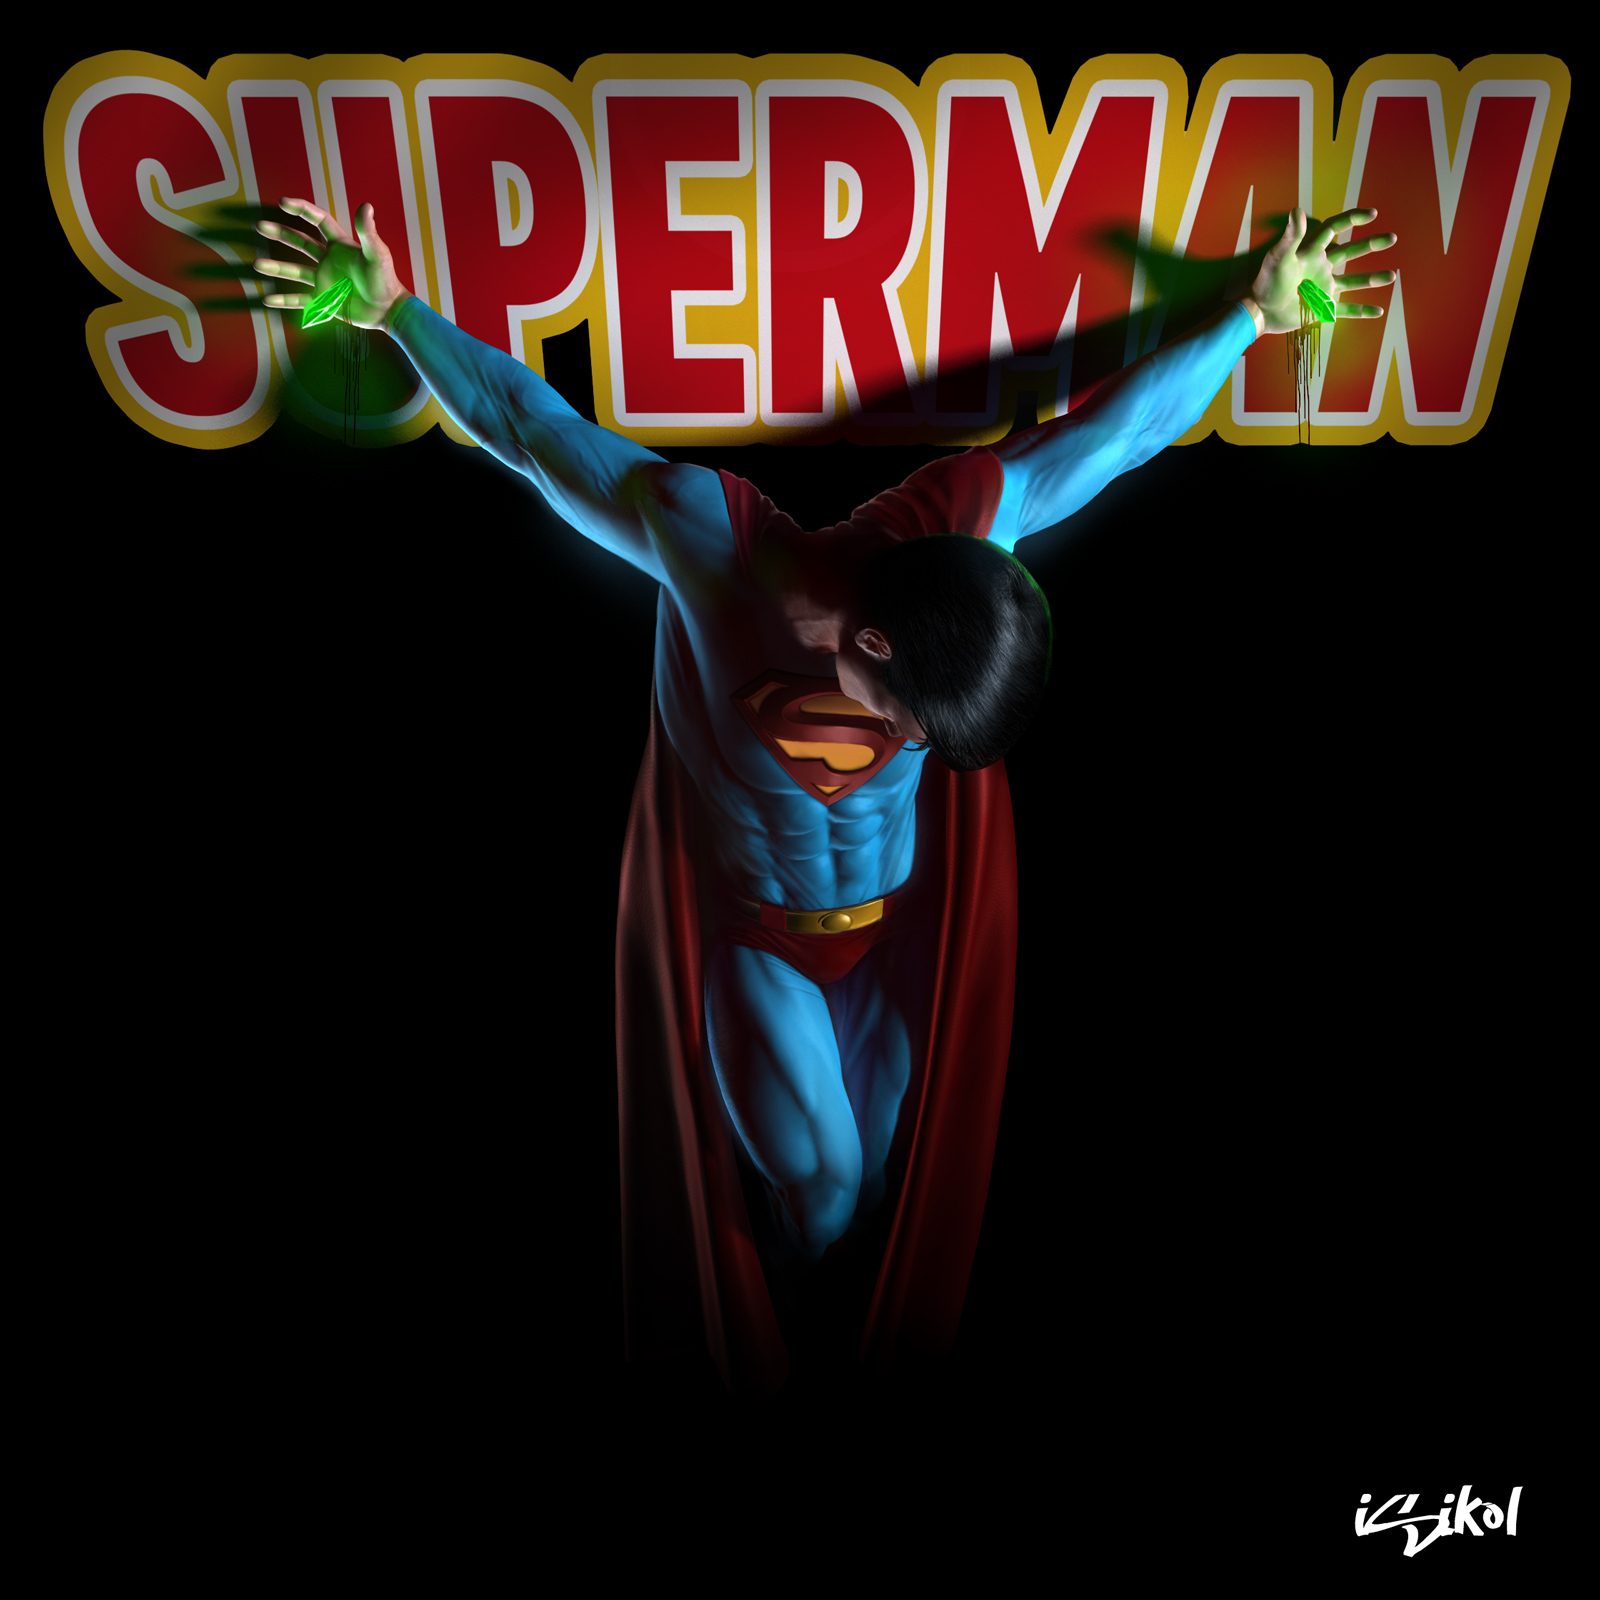 SUPERMAN CRUCIFIXION by isikol on